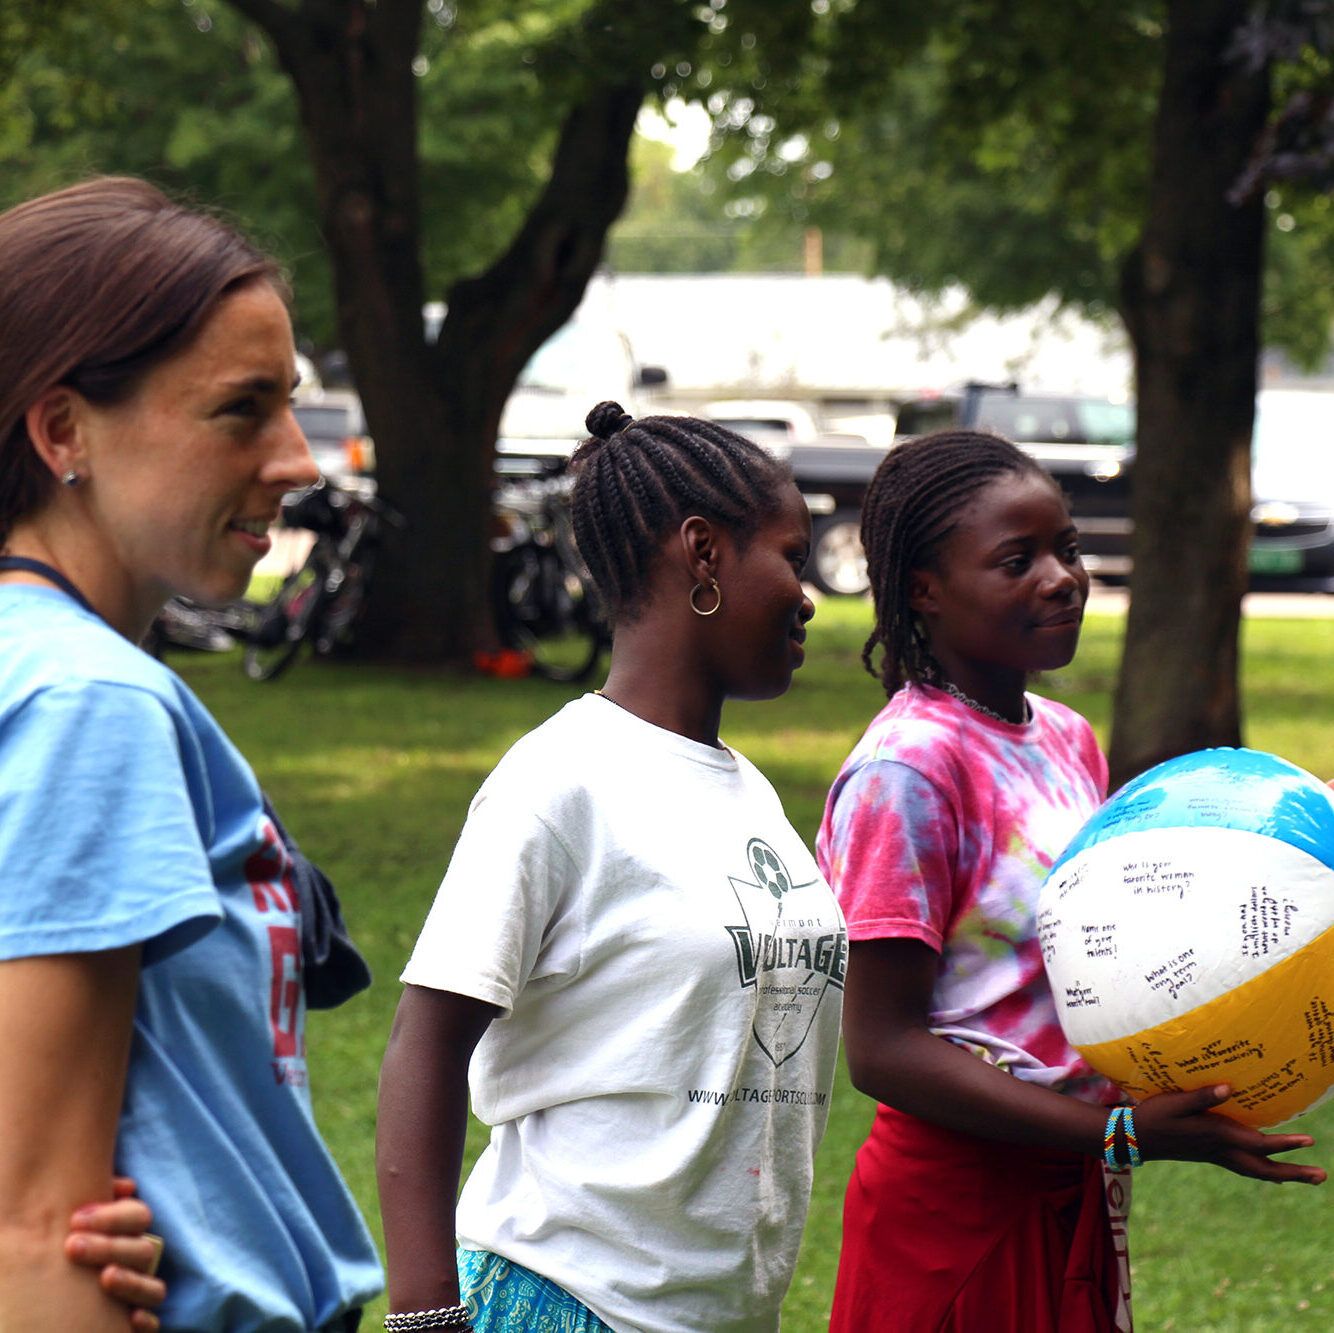 VWW staff member stands with two Rosie’s Girls campers. One camper is holding a beach ball for a name game. Donating to Vermont Works for Women is the best way to support programs like these.